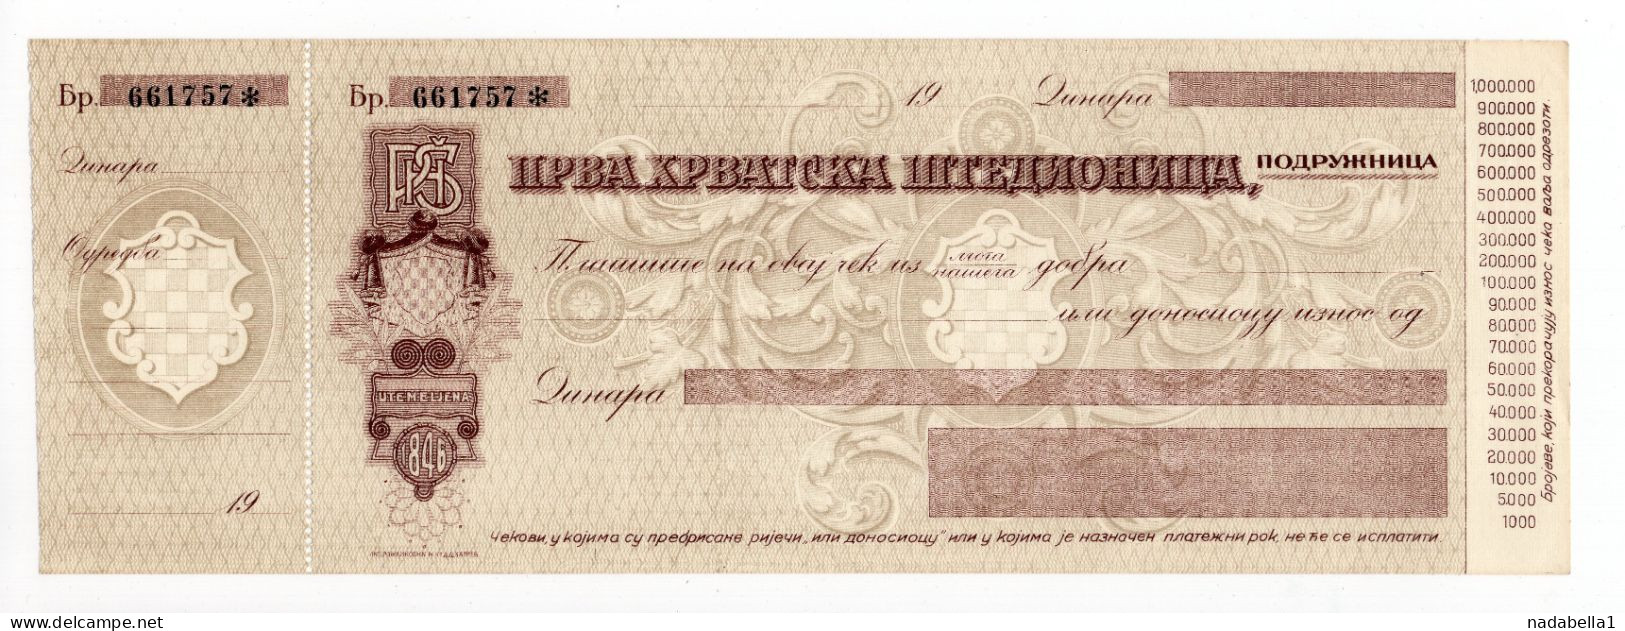 1920? KINGDOM OF SHS,CROATIA,CHEQUE,FIRST CROATIAN SAVINGS BANK,ESTABLISHED IN 1846.CYRILLIC TEXT - Cheques & Traverler's Cheques